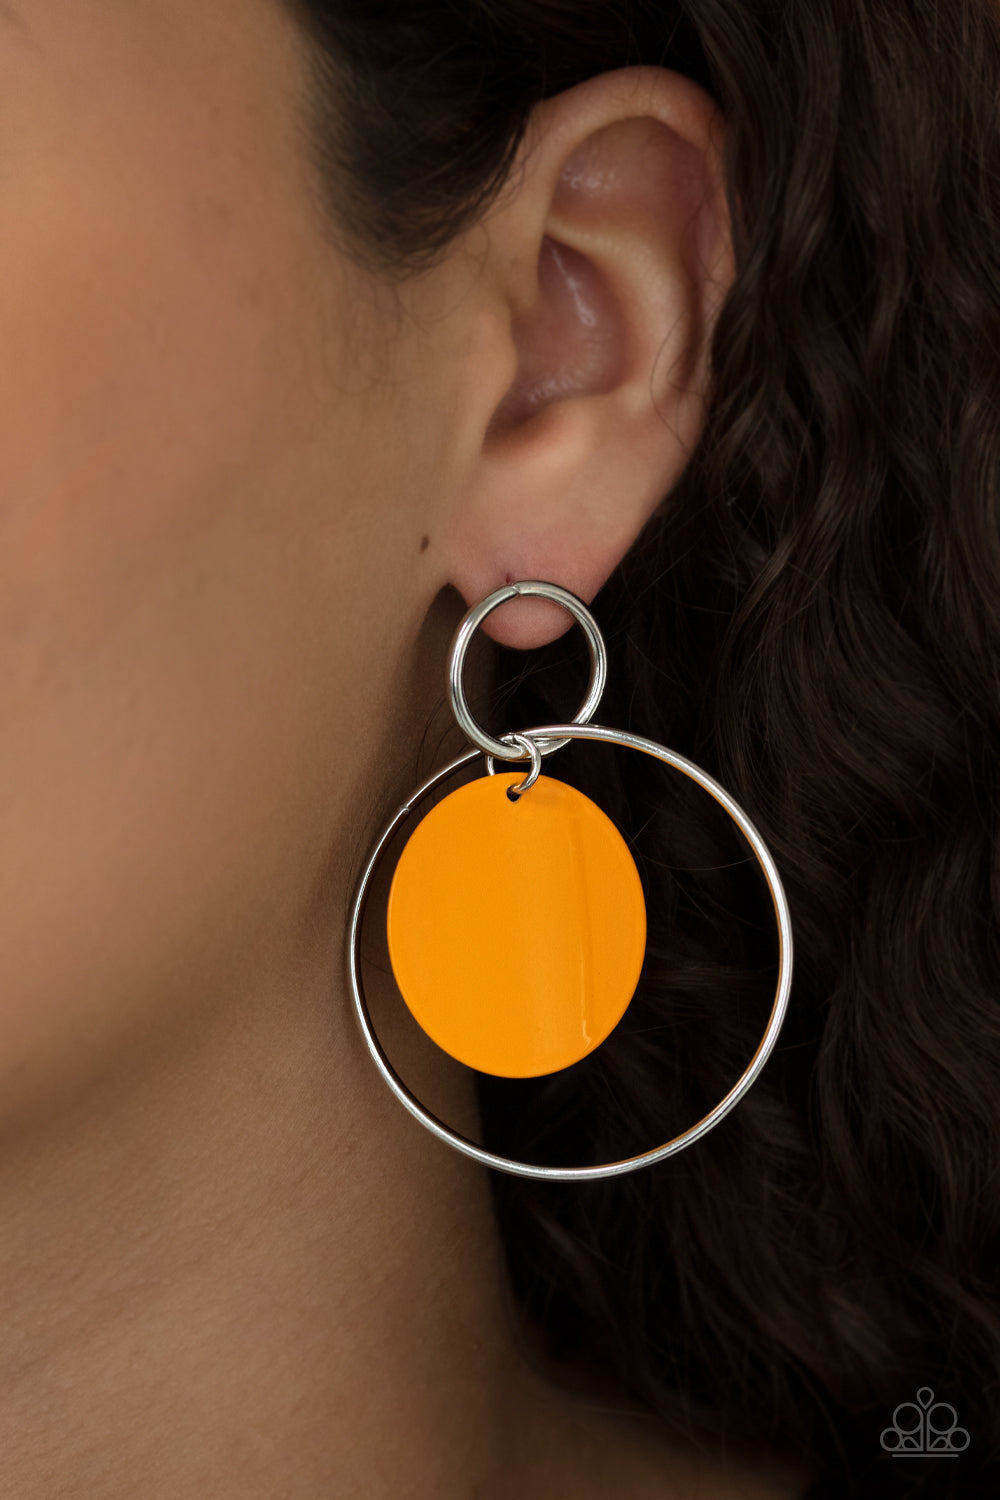 POP, Look, and Listen - Orange and Silver Earrings - Paparazzi Accessories - Marigold disc swings from two interlocking silver hoops, creating a flirtatious pop of color. Earring attaches to a standard post fitting. Sold as one pair of post earrings.